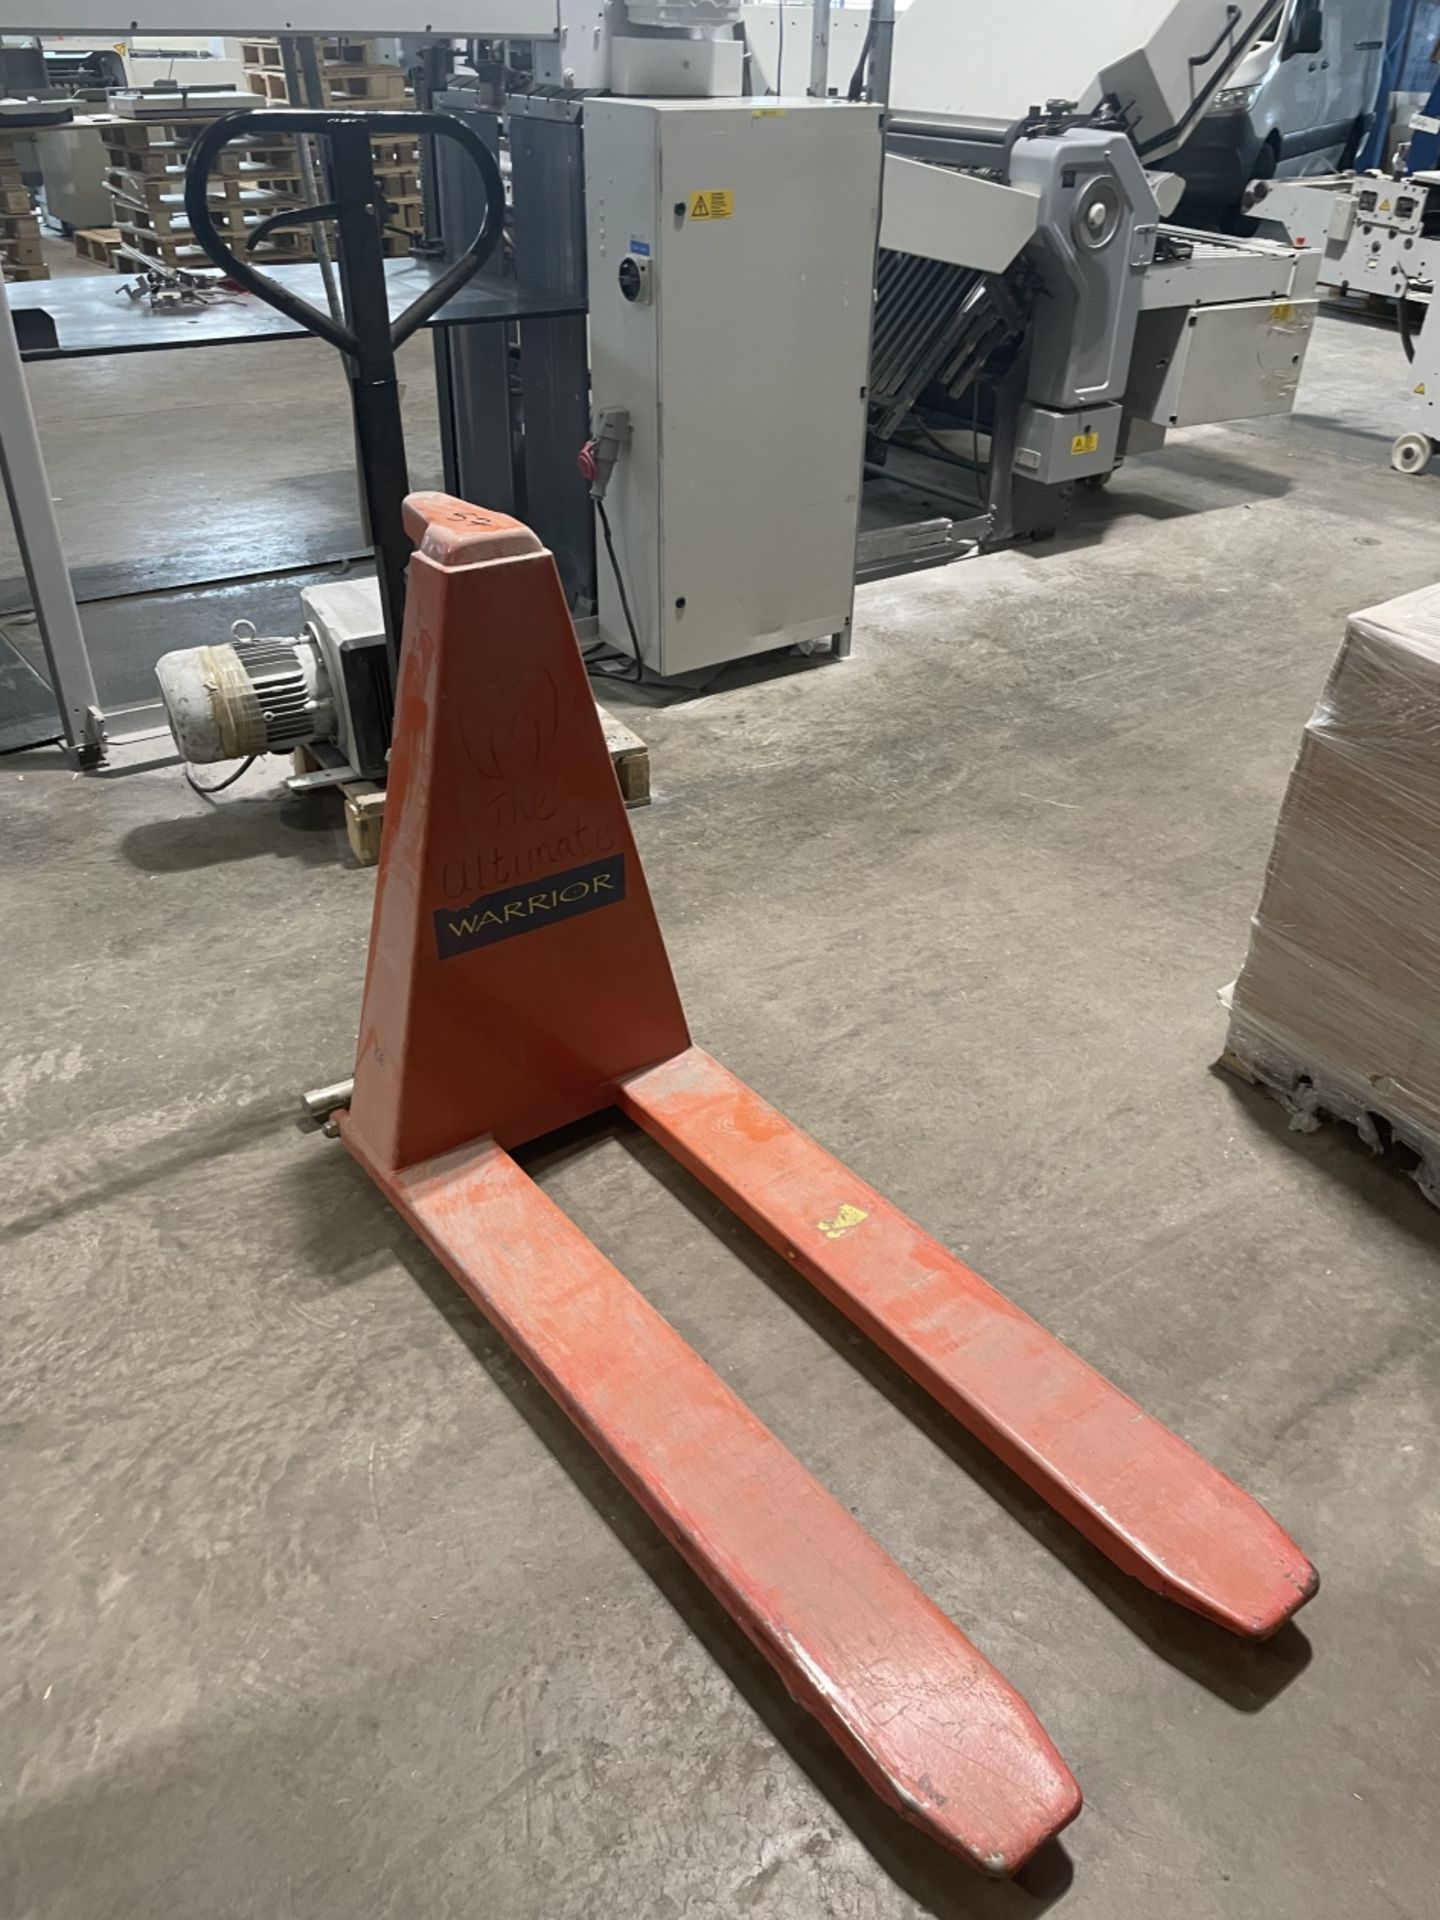 Warrior 1000kg Hand Hydraulic High Lift Pallet Truck (red)Please read the following important